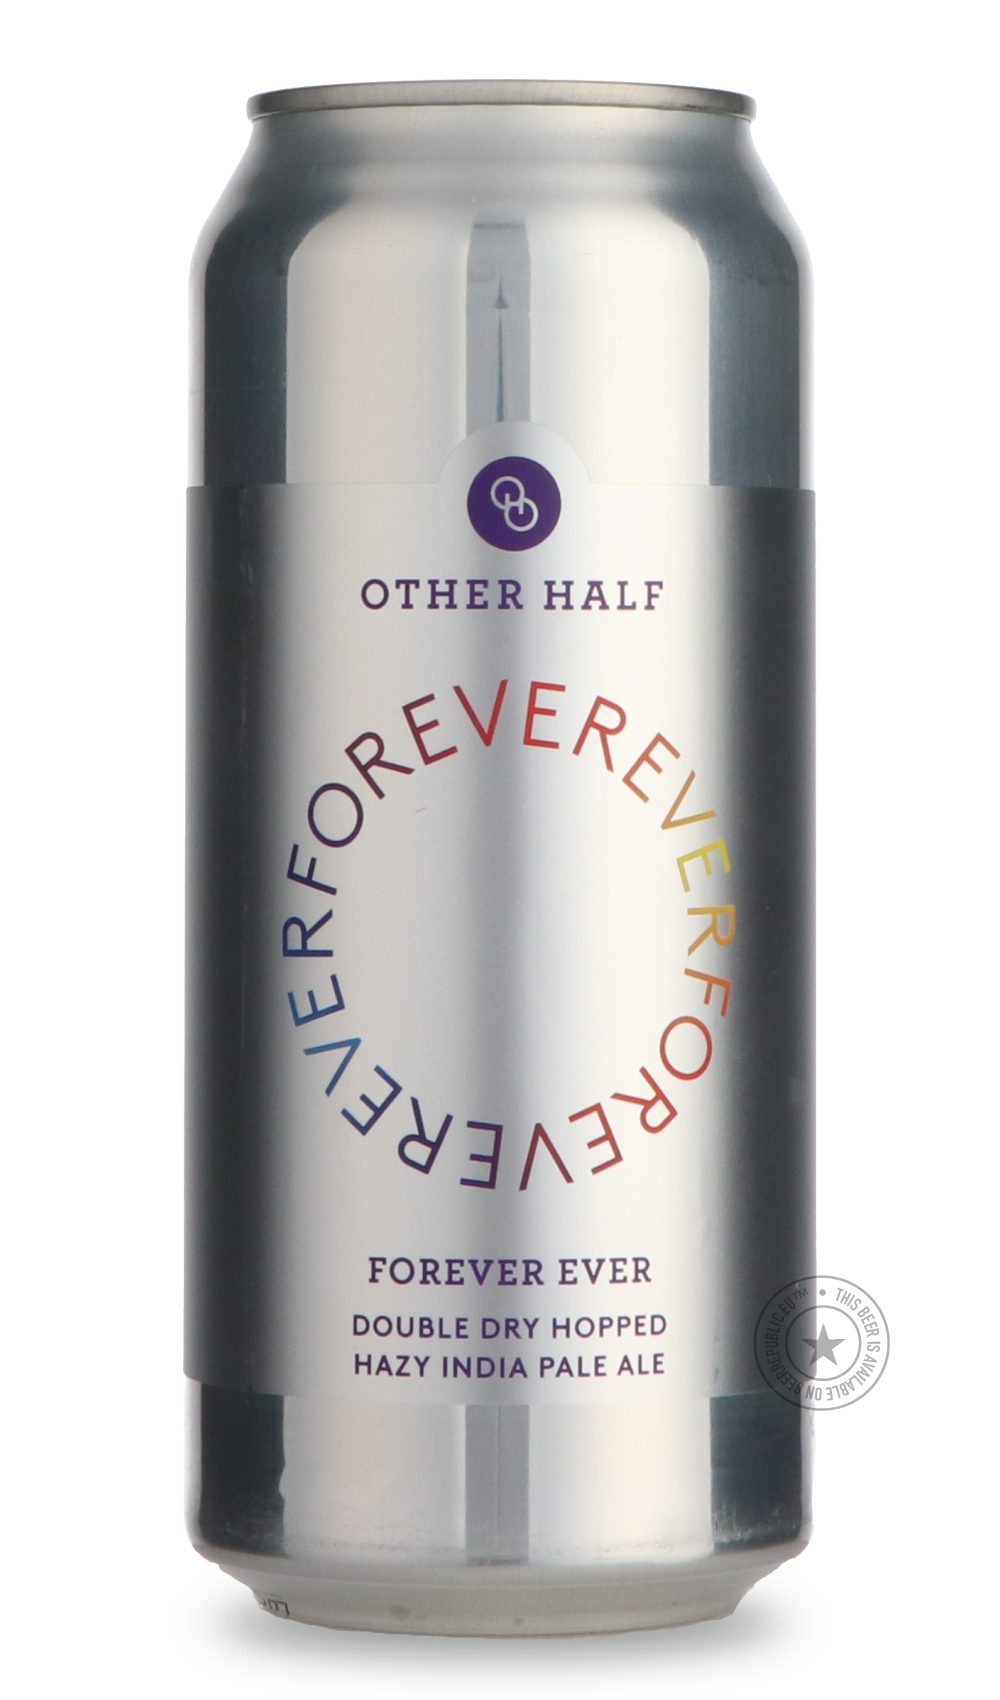 -Other Half- DDH Forever Ever-IPA- Only @ Beer Republic - The best online beer store for American & Canadian craft beer - Buy beer online from the USA and Canada - Bier online kopen - Amerikaans bier kopen - Craft beer store - Craft beer kopen - Amerikanisch bier kaufen - Bier online kaufen - Acheter biere online - IPA - Stout - Porter - New England IPA - Hazy IPA - Imperial Stout - Barrel Aged - Barrel Aged Imperial Stout - Brown - Dark beer - Blond - Blonde - Pilsner - Lager - Wheat - Weizen - Amber - Bar